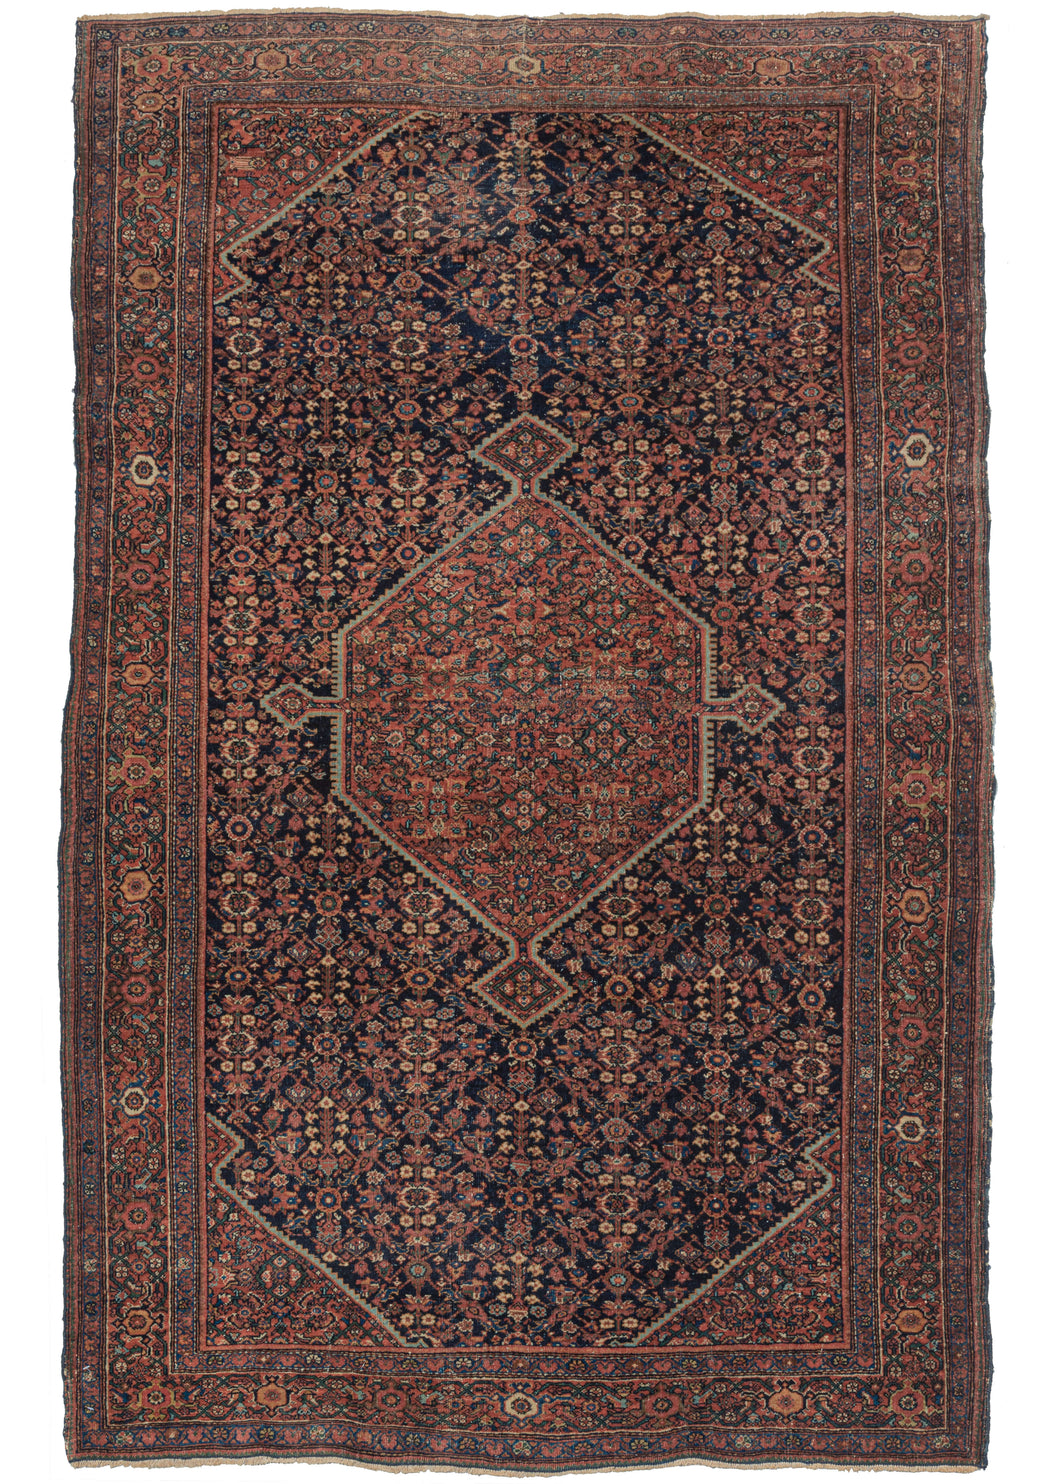 Antique Farahan Rug features a navy ground Herati design field with cornices and a central polygon medallion utilizing a red ground Herati pattern. A fun play of pattern and color that is finely woven and well-executed. The main border is a detailed scrolling palmette design with two minor borders of alternating rosettes.